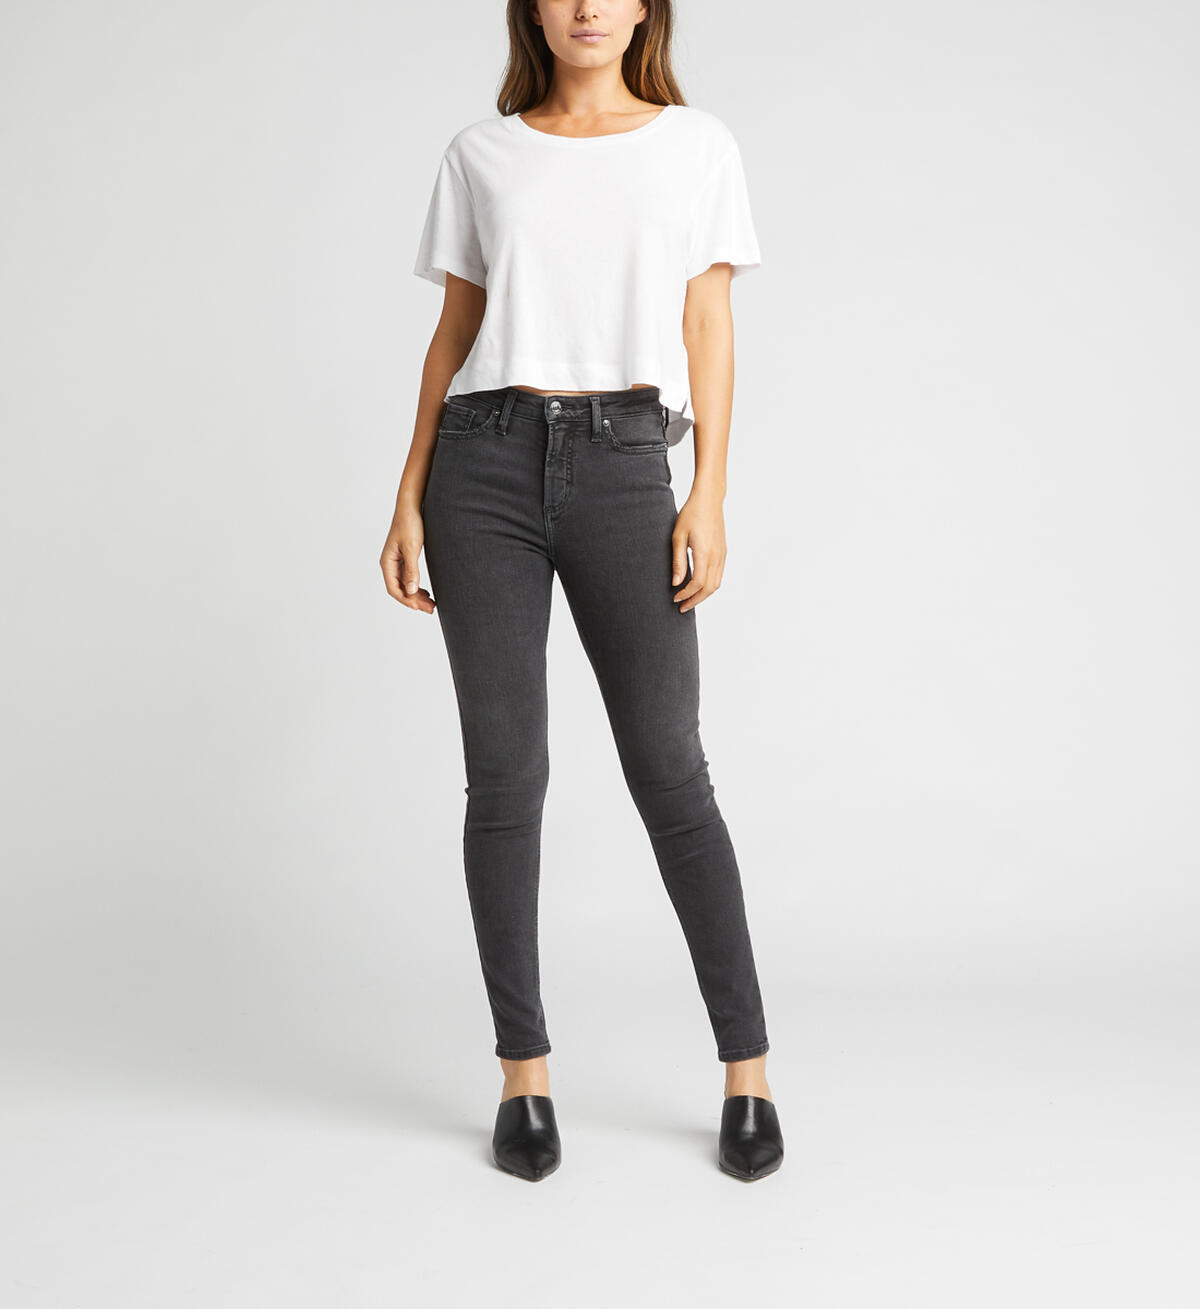 High Note High Rise Skinny Jeans, , hi-res image number 3